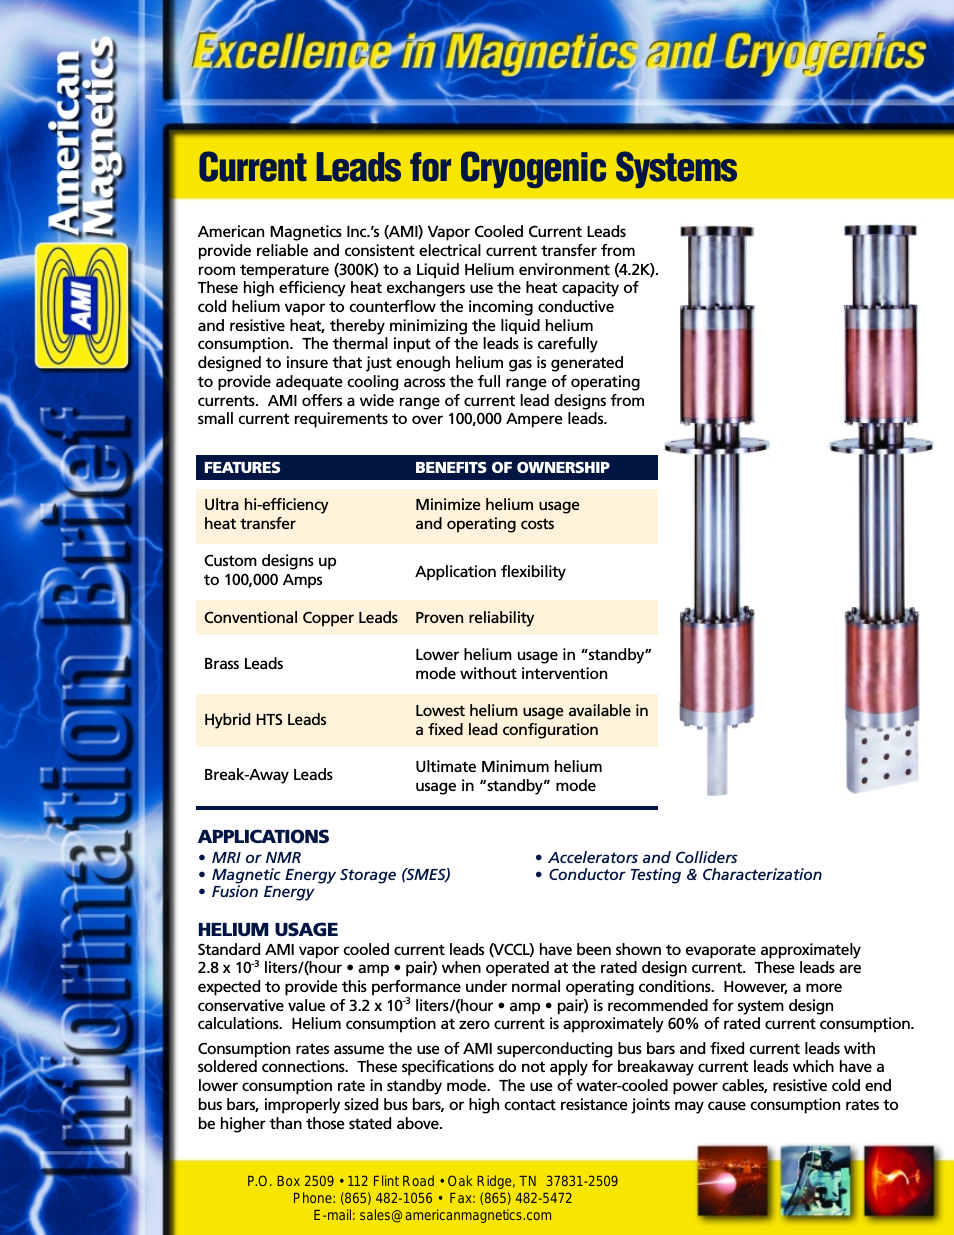 Current Leads for Cryogenic Systems Brochure